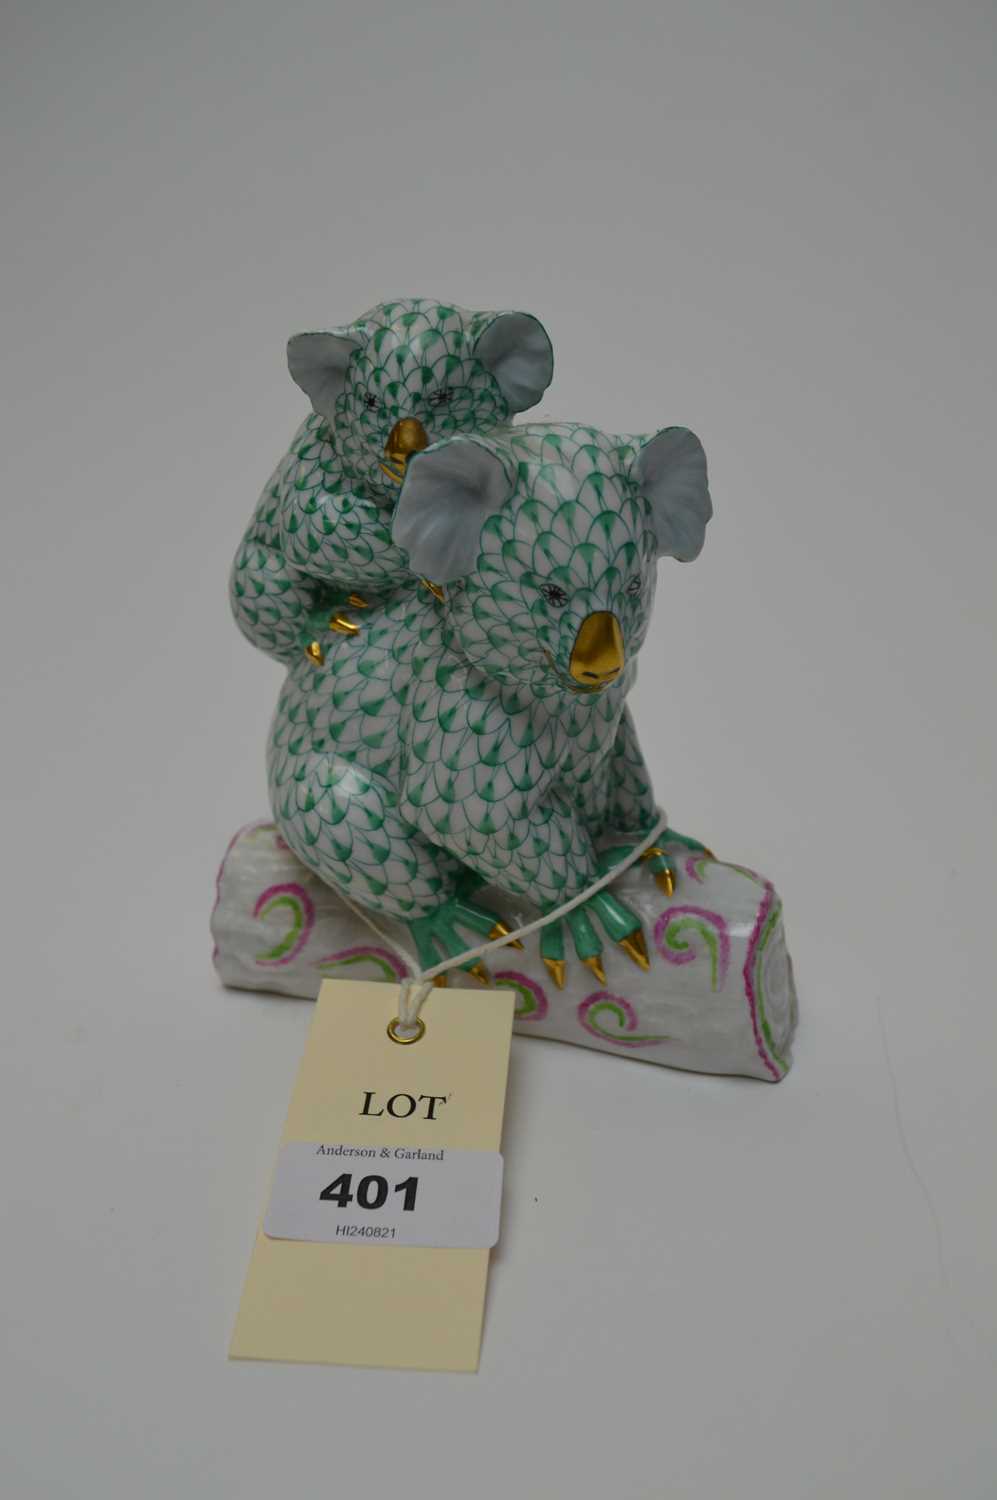 Lot 401 - Herend figure group of two koalas